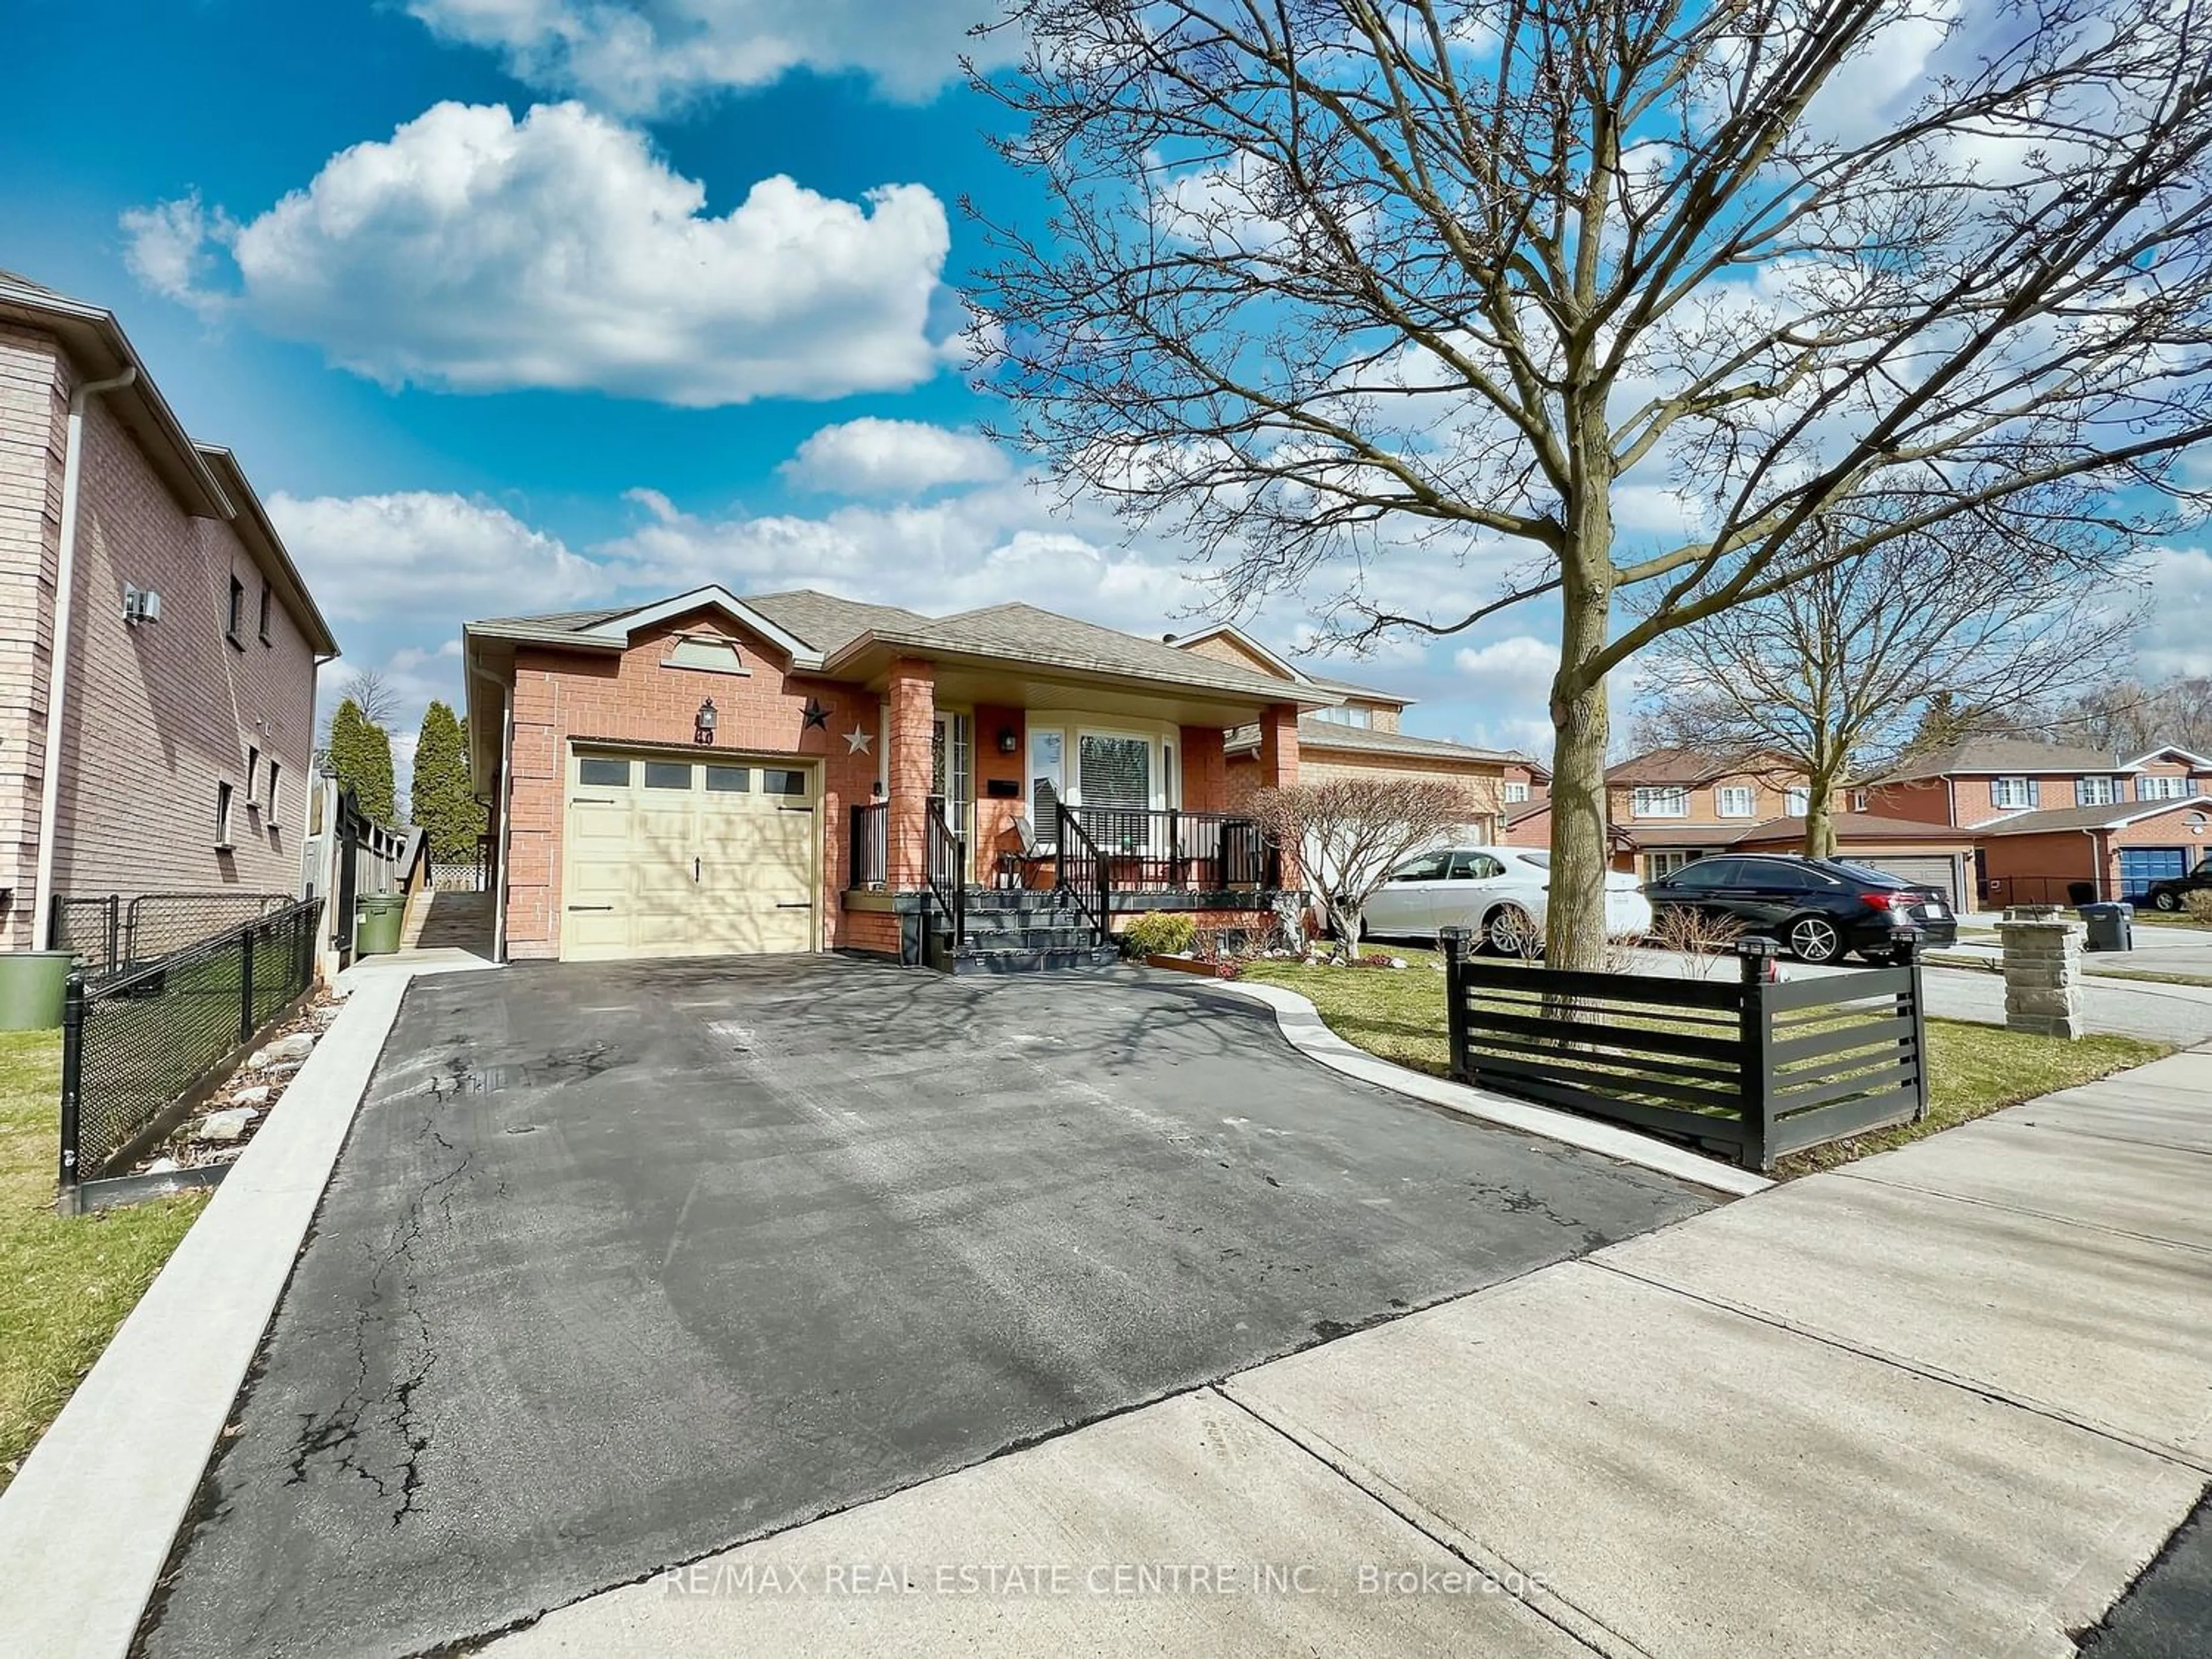 Frontside or backside of a home for 40 Braemore Rd, Brampton Ontario L6X 1E5